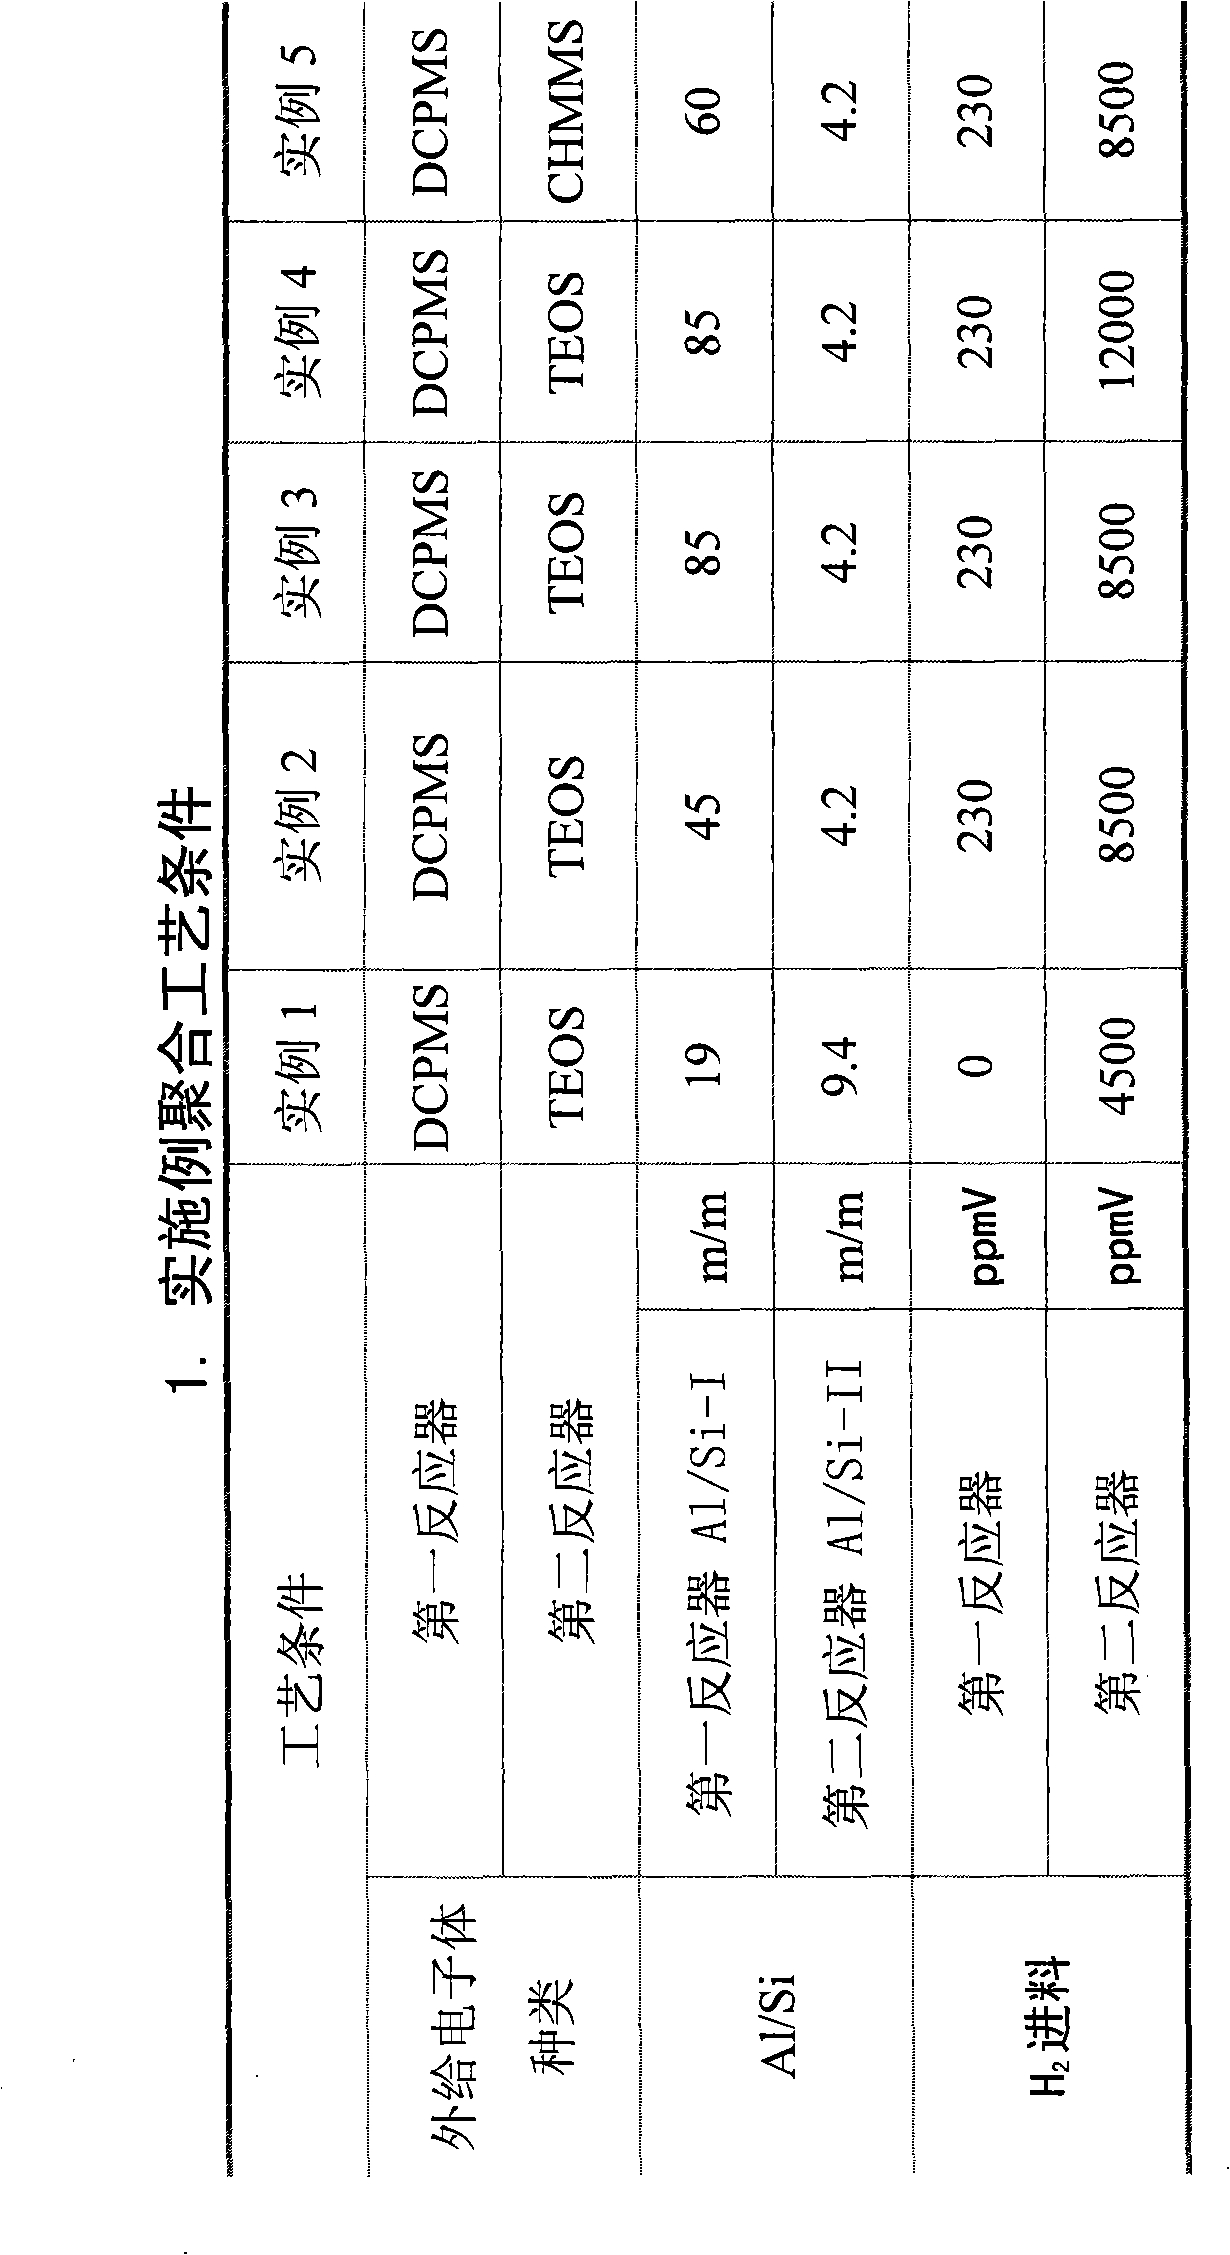 Polypropylene with high melt strength and product thereof